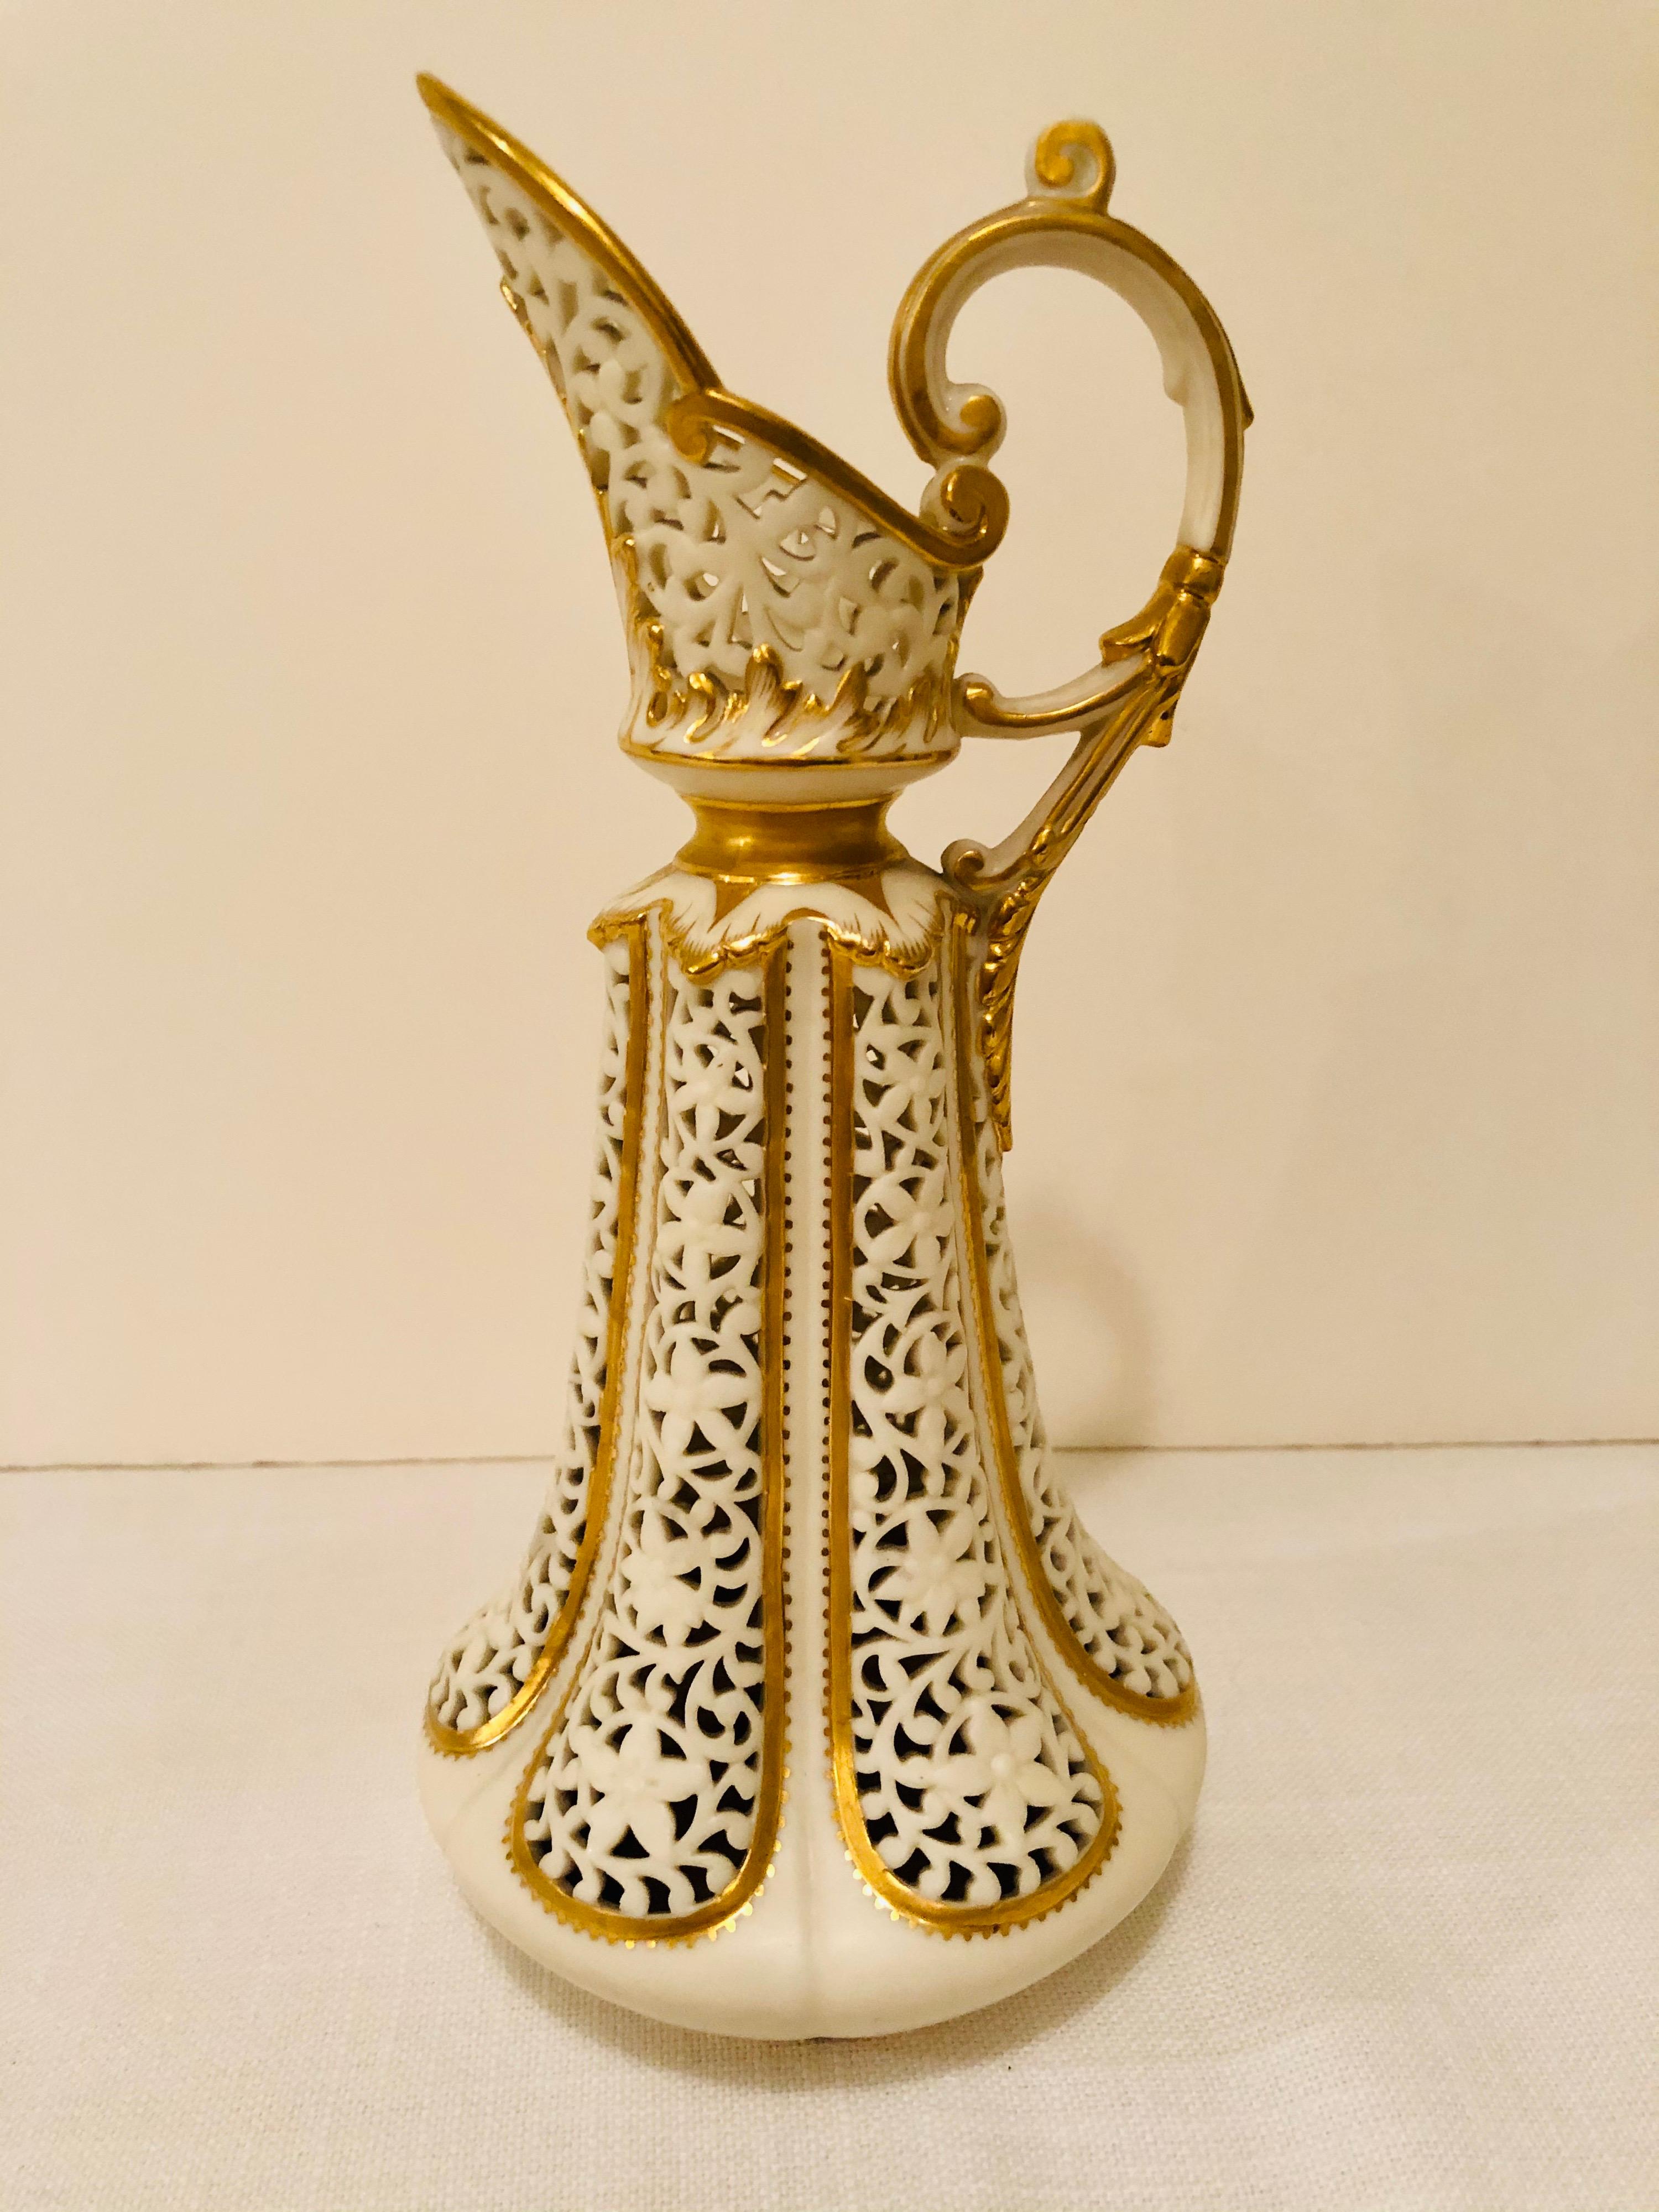 Porcelain Grainger and Company Worcester Elaborately Reticulated Vase with Gilded Accents